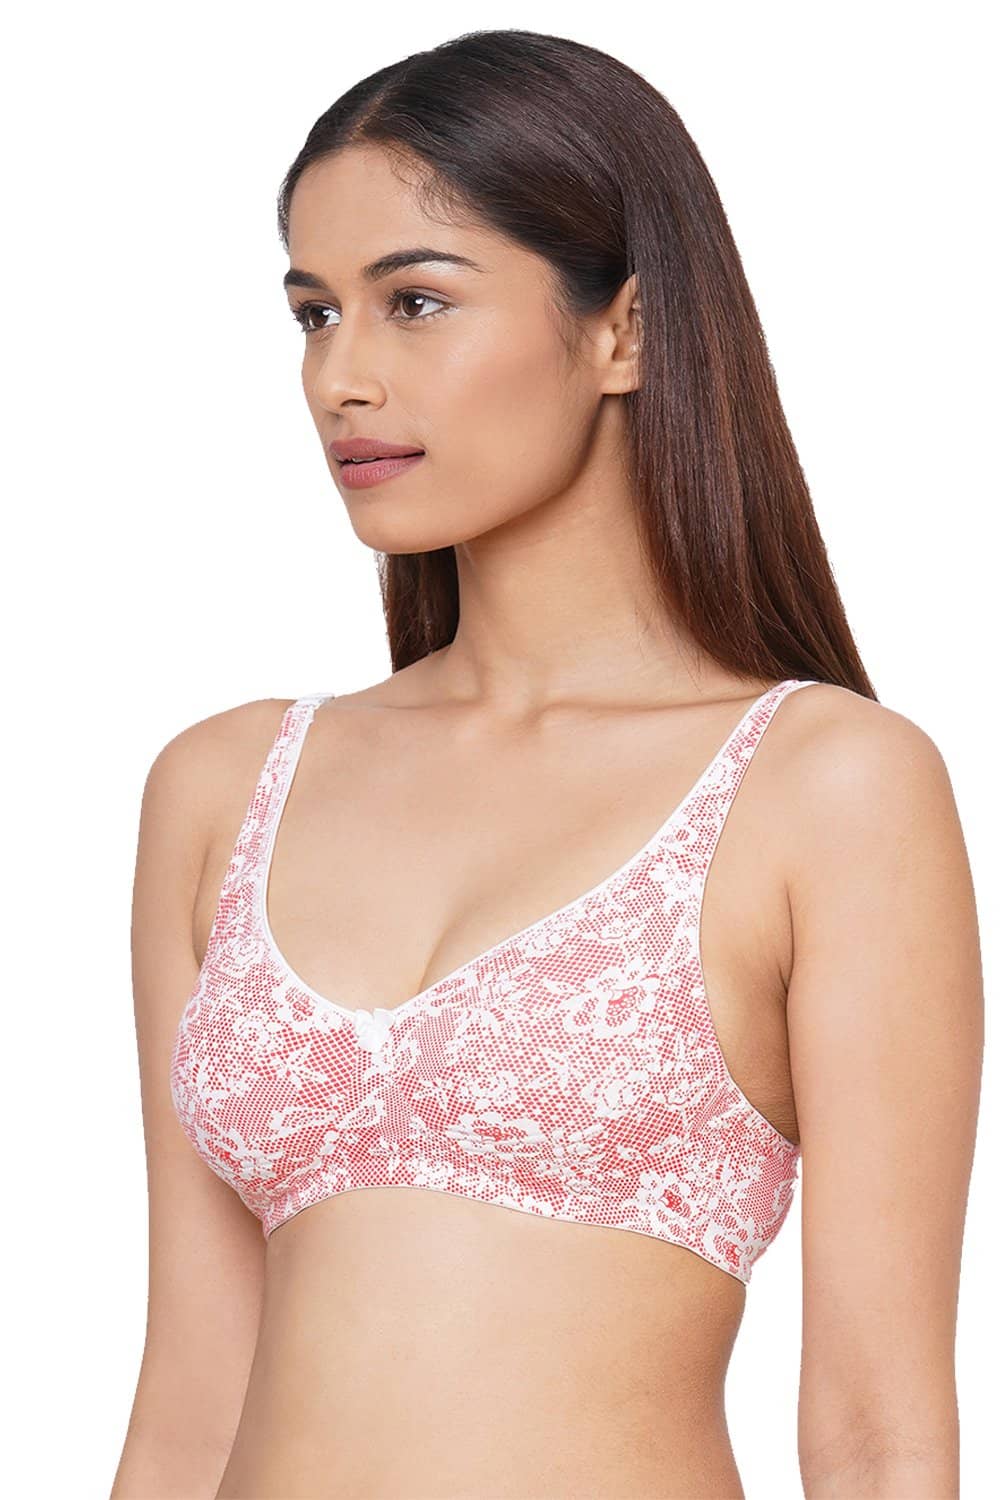 Organic Cotton  Antimicrobial  Seamless Side Support Bra (Pack of 2)-ISB057-Pink Lace Print_Skin-